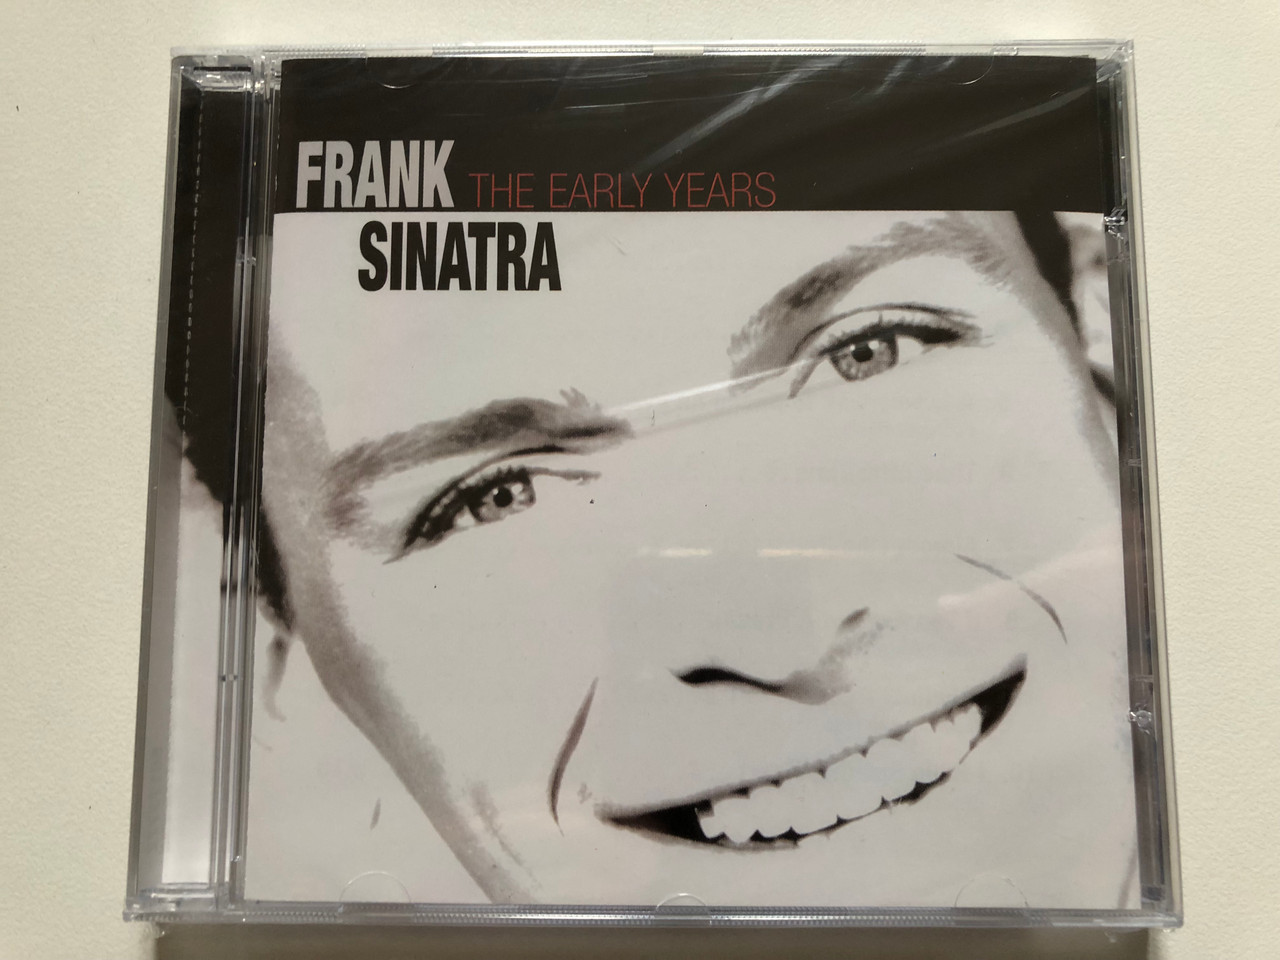 https://cdn10.bigcommerce.com/s-62bdpkt7pb/products/0/images/311340/Frank_Sinatra_The_Early_Years_Elap_Music_Audio_CD_2002_50173772_1__19996.1699604443.1280.1280.JPG?c=2